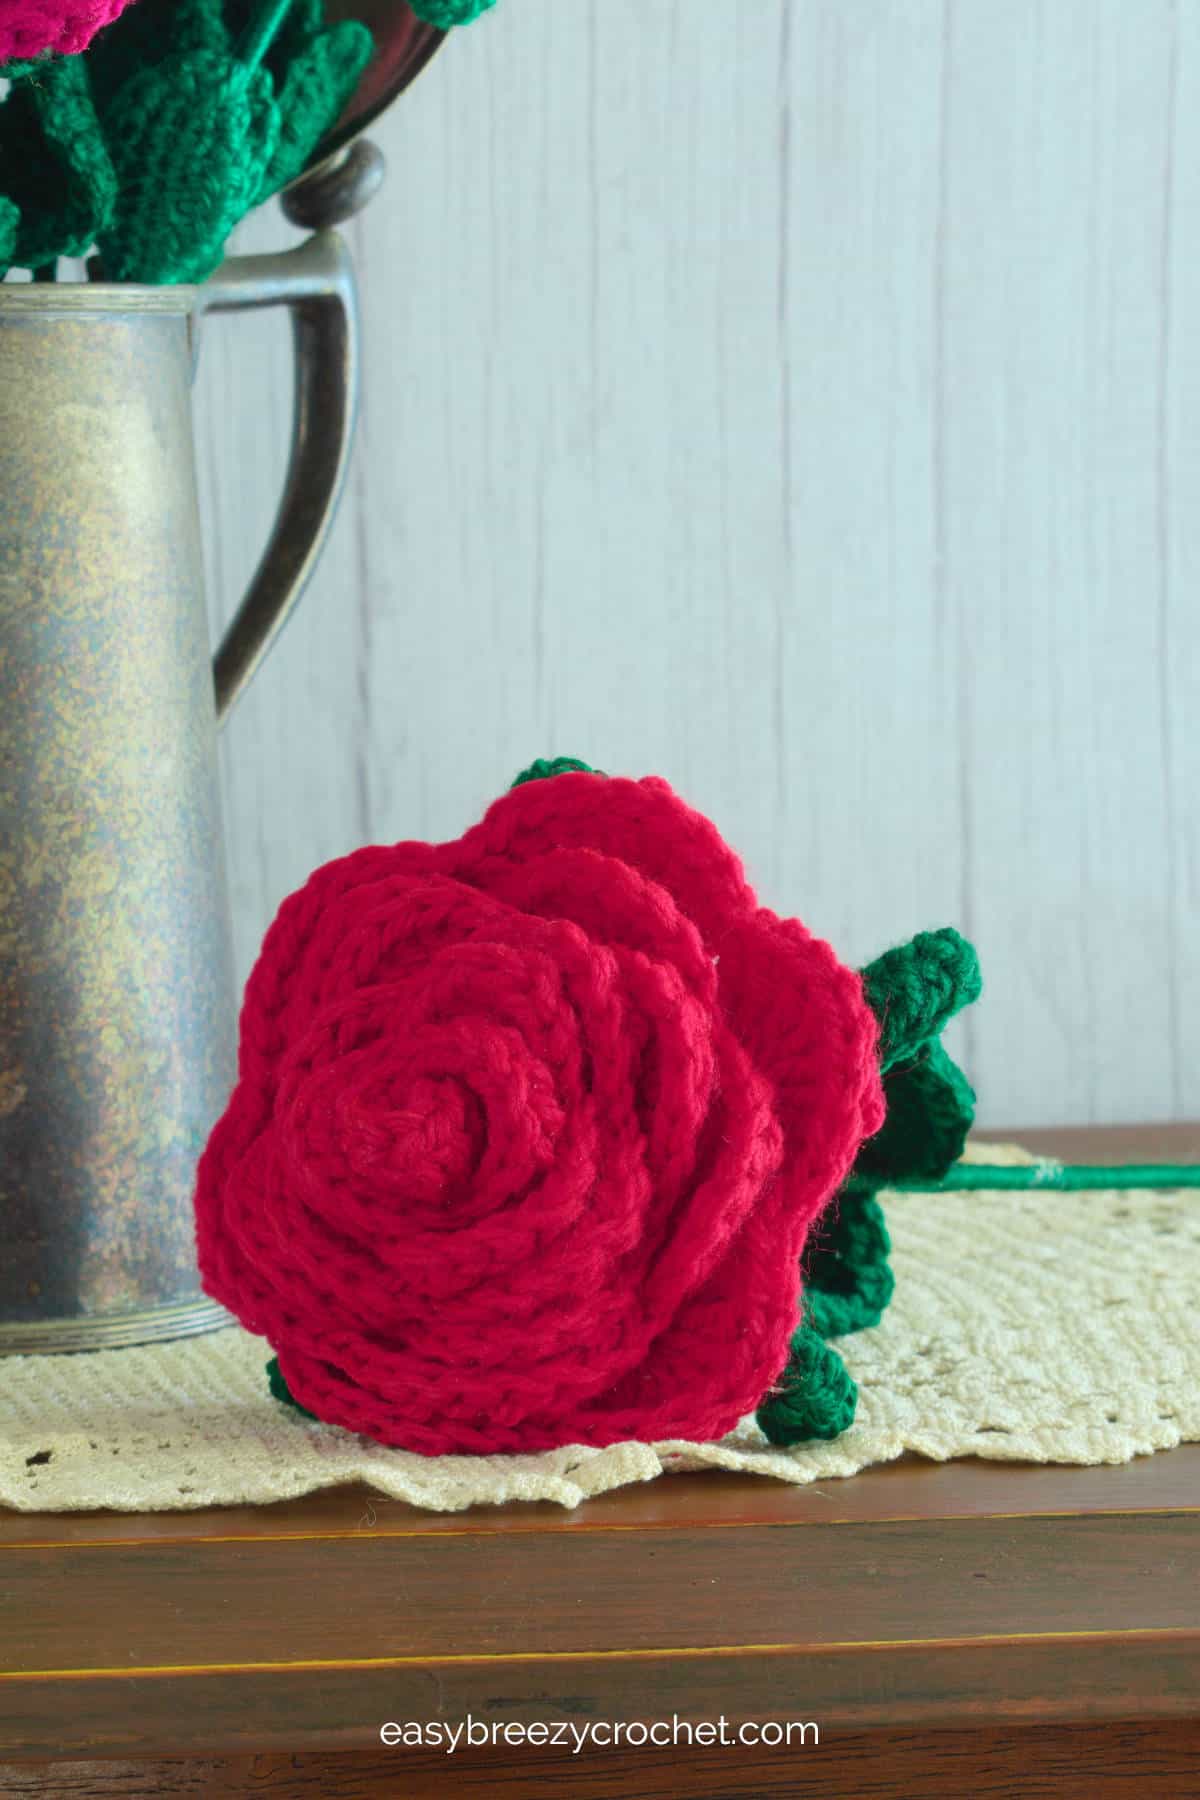 A close up of a single red crocheted rose.